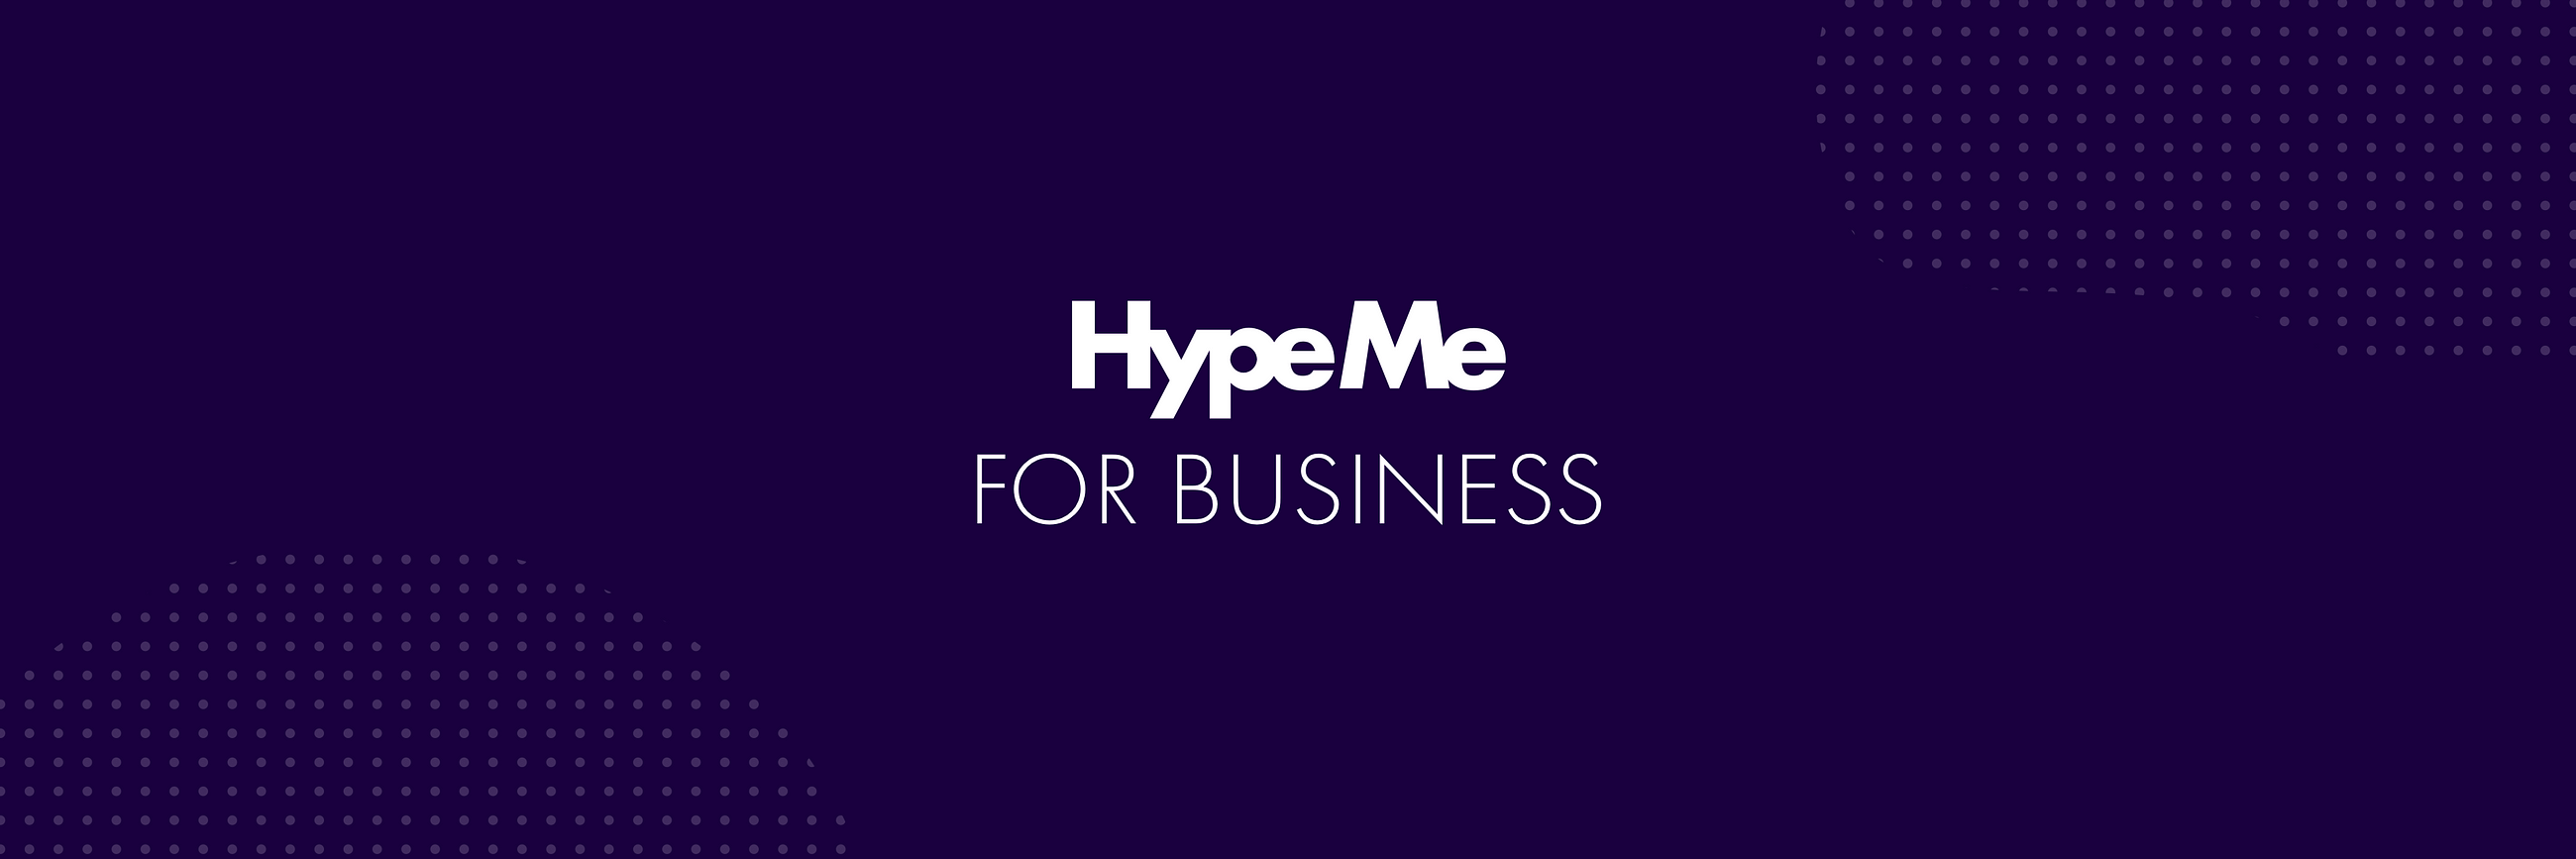 Introducing Hype Me for Business